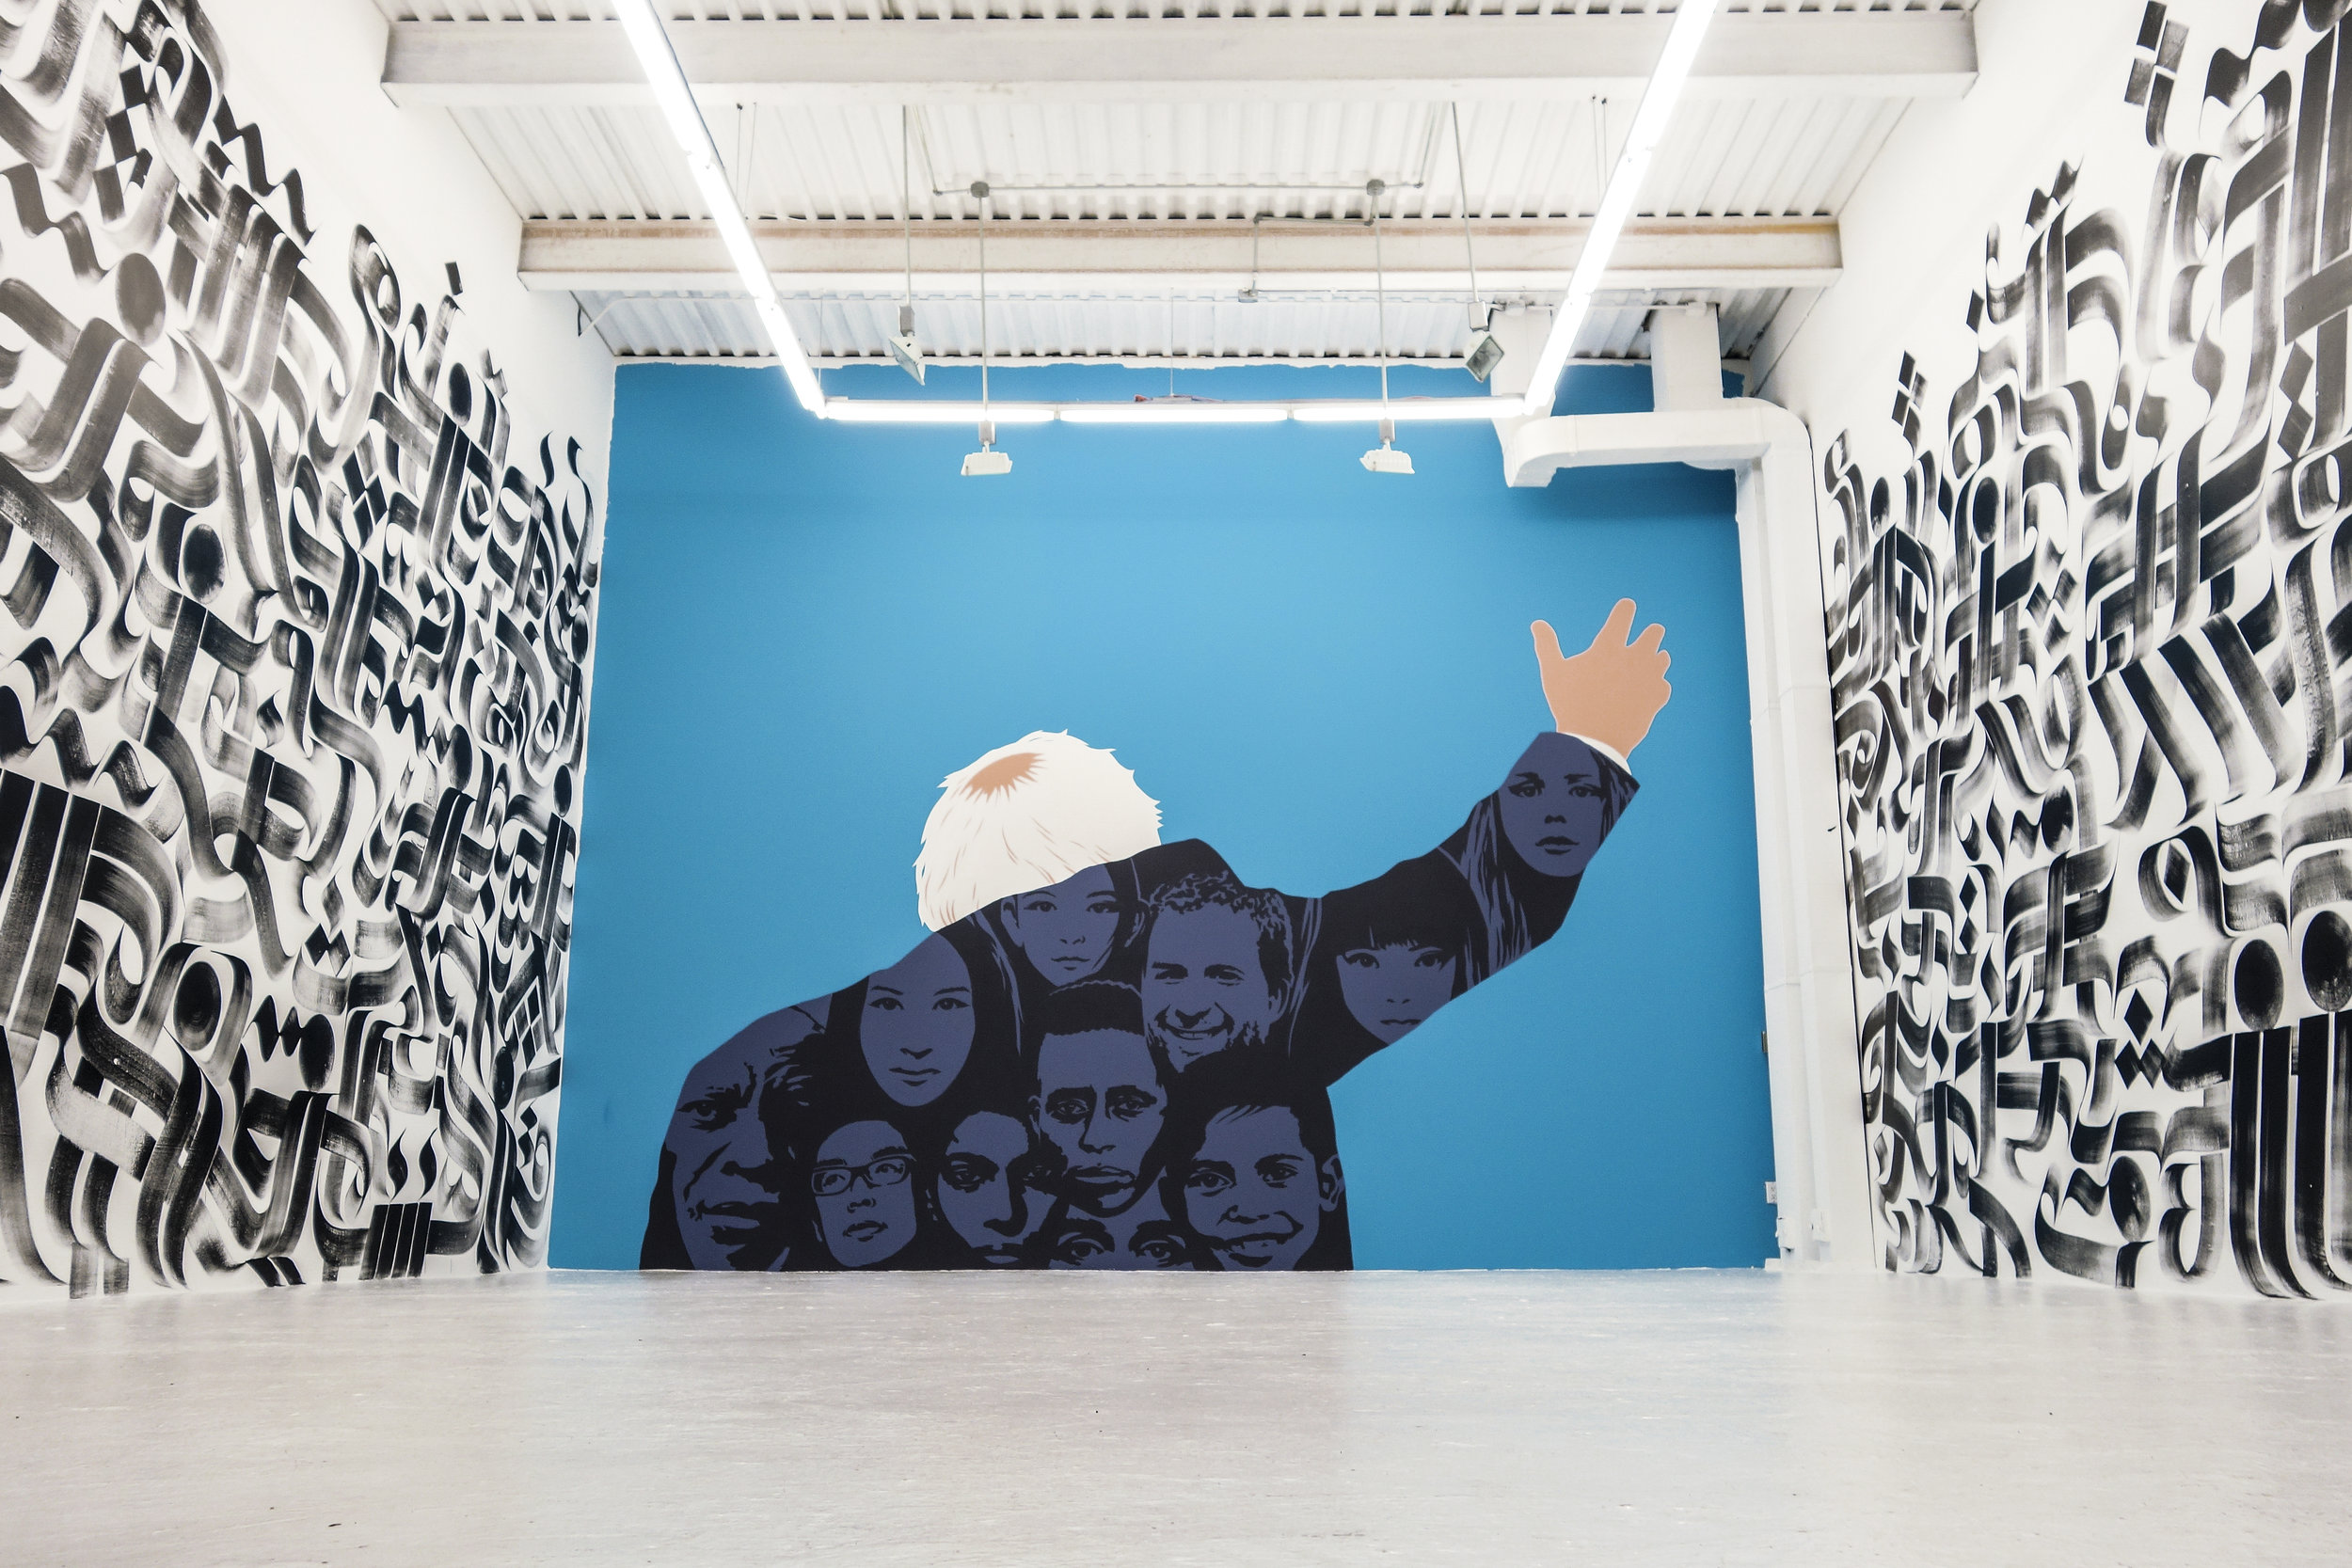  Installation View,&nbsp; 'We The People...' (detail), Mural installation for 'The Art Of A Political Revolution', at The Hole Gallery, NYC, 2016 center artwork: Dan Buller photography: Craig Wetherby 